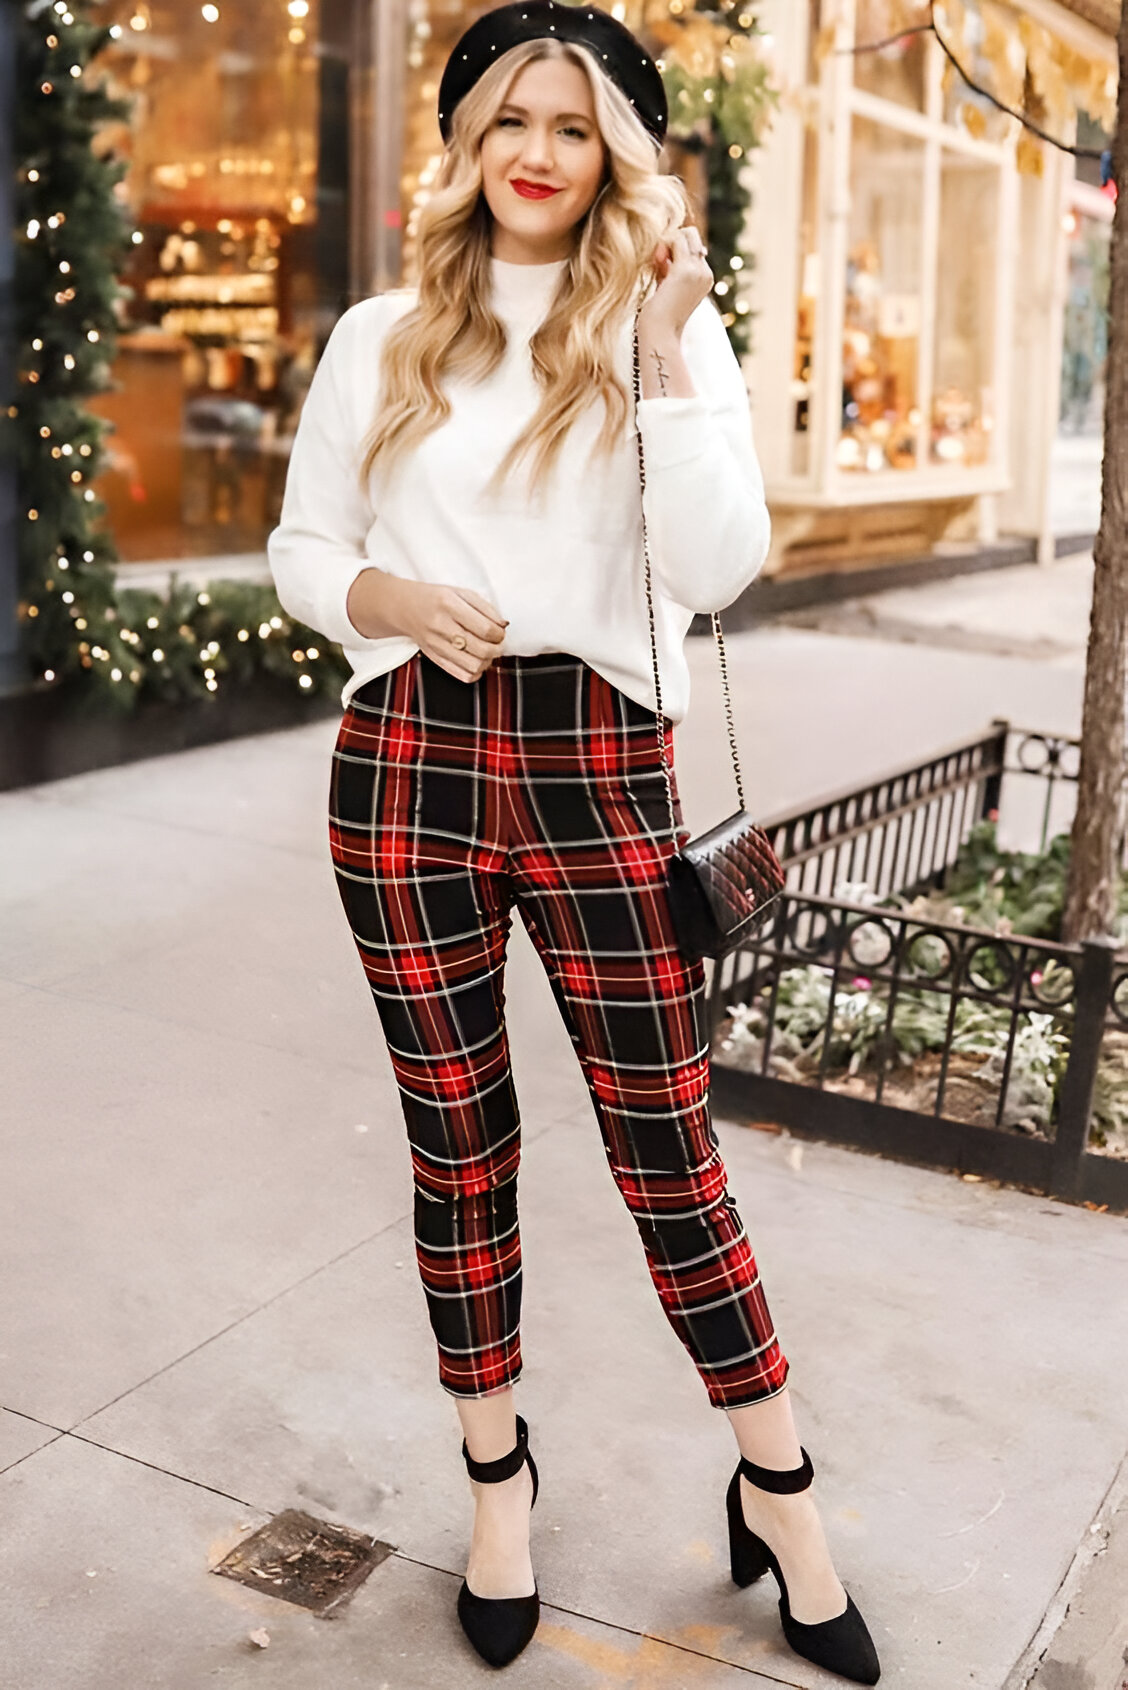 Simple Yet Cute Holiday Outfits